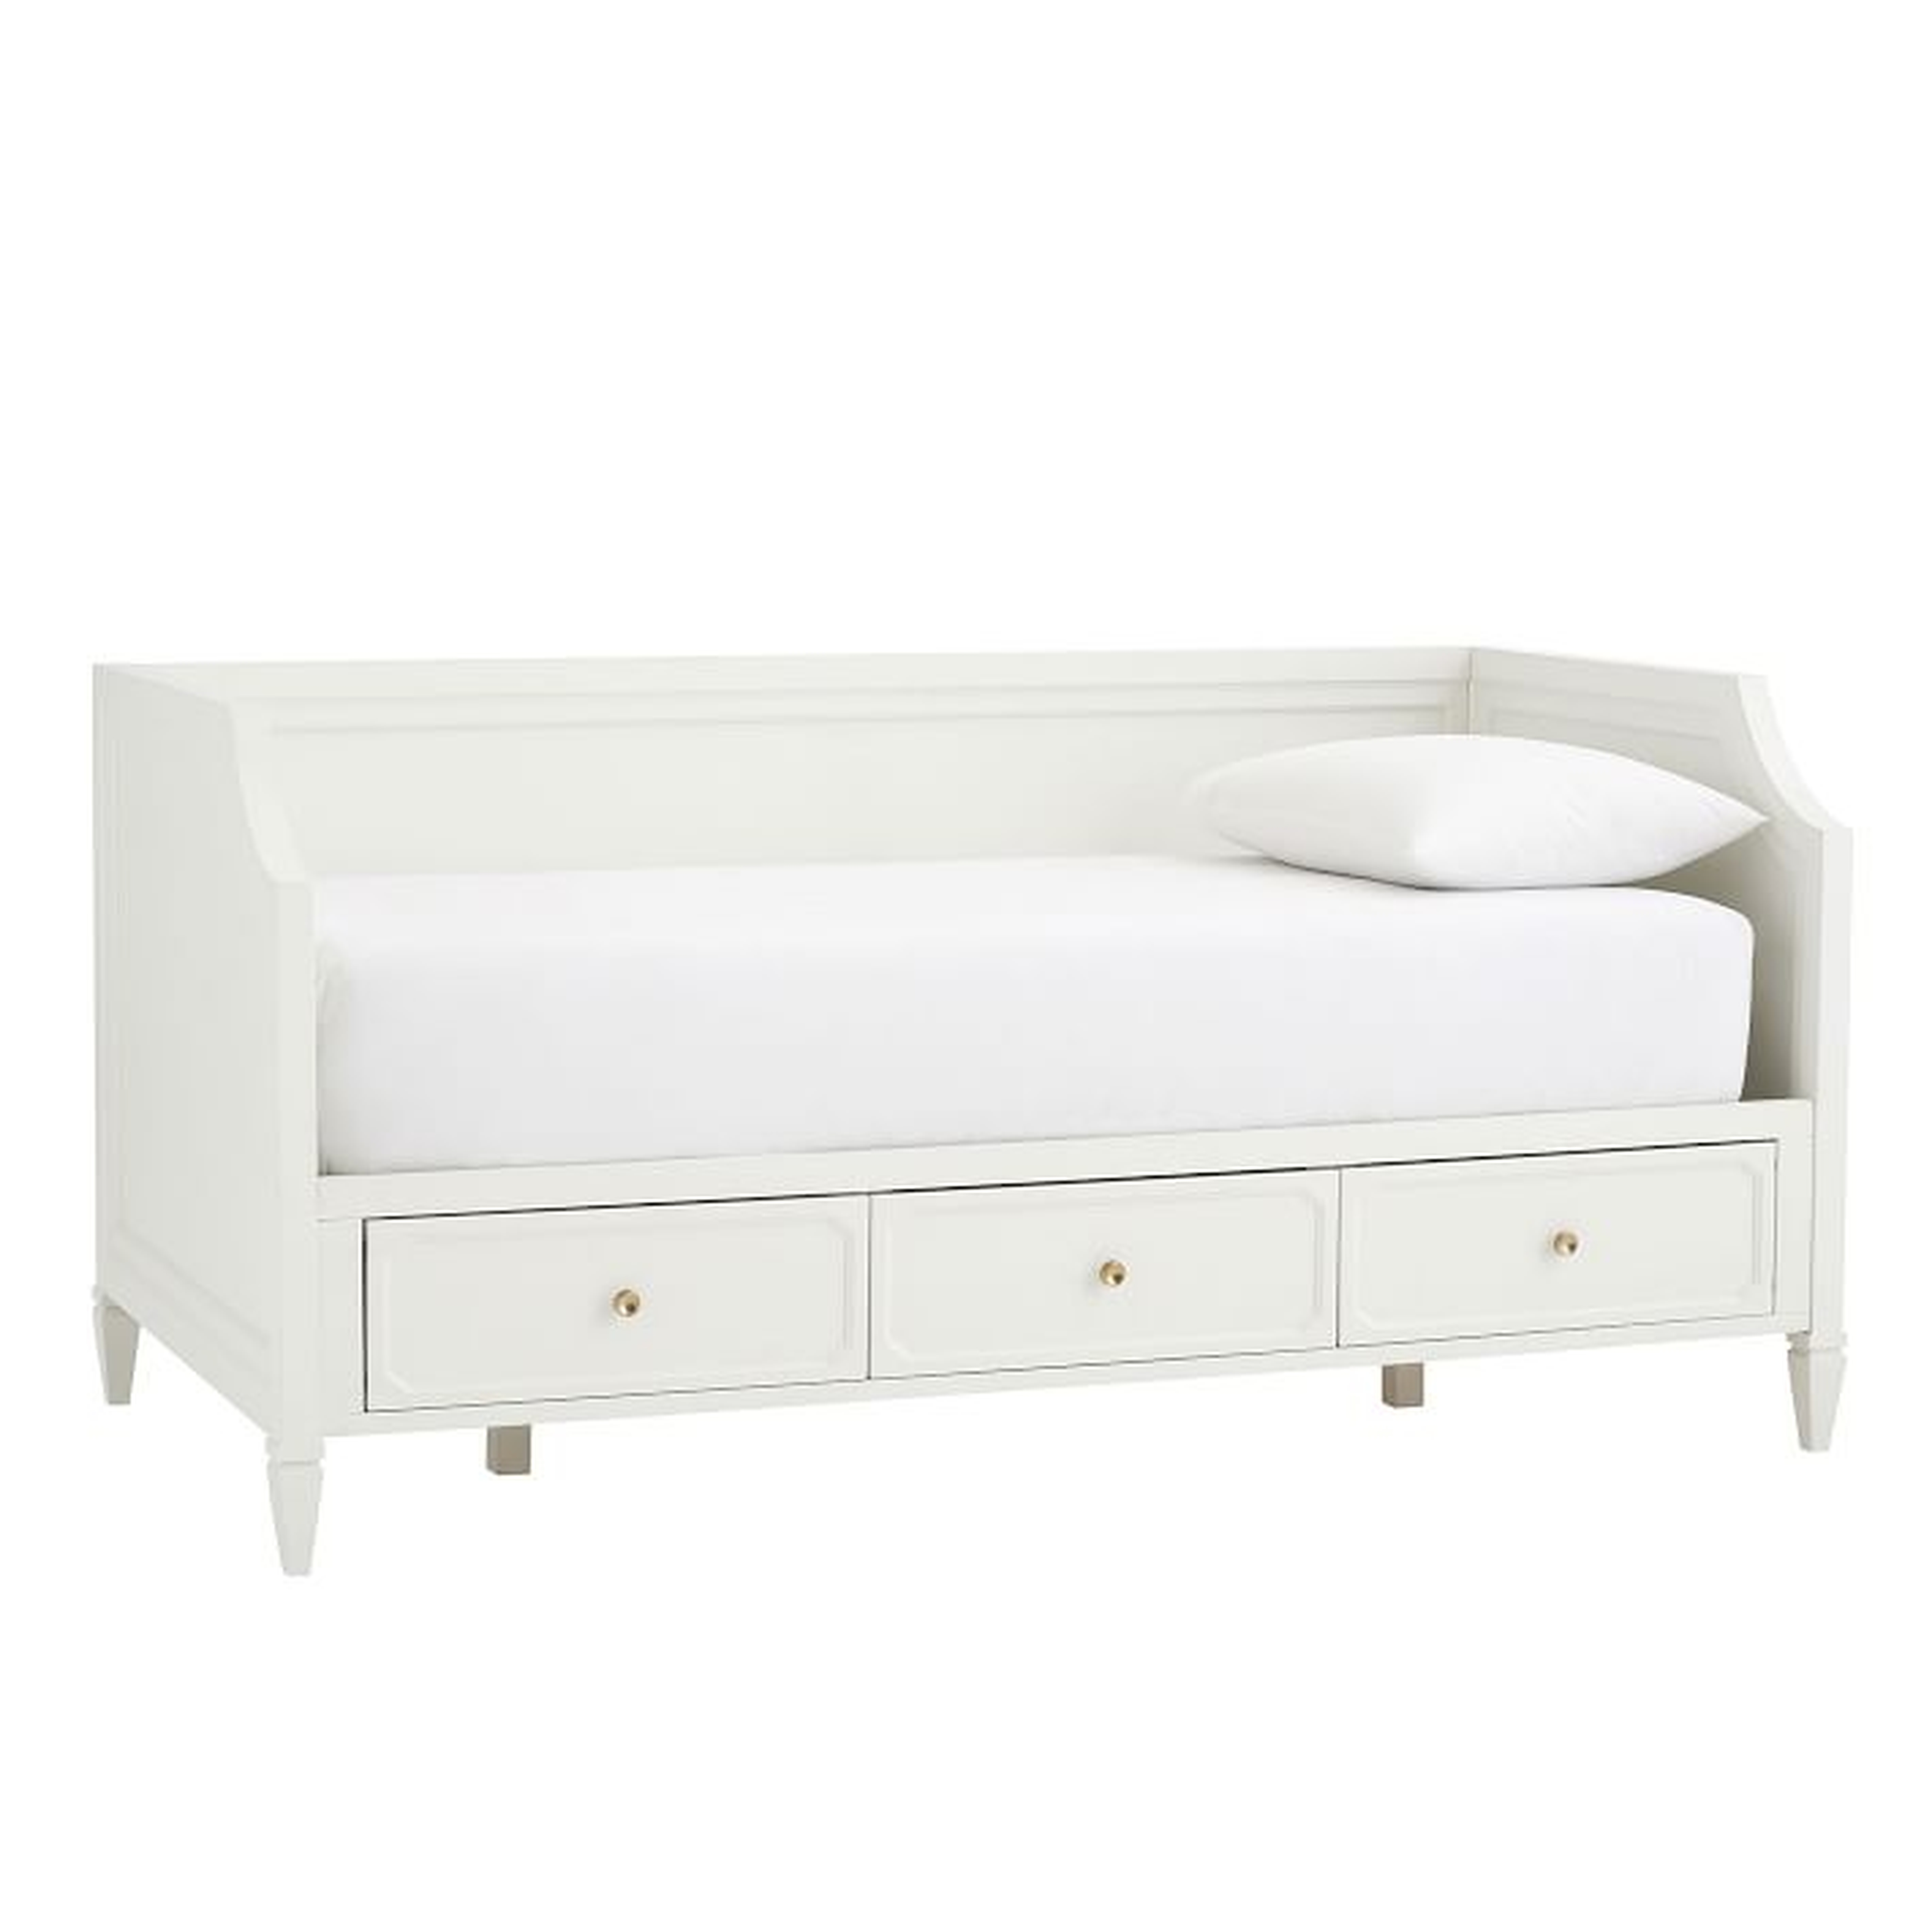 Auburn Storage Daybed, Twin, Simply White - Pottery Barn Teen